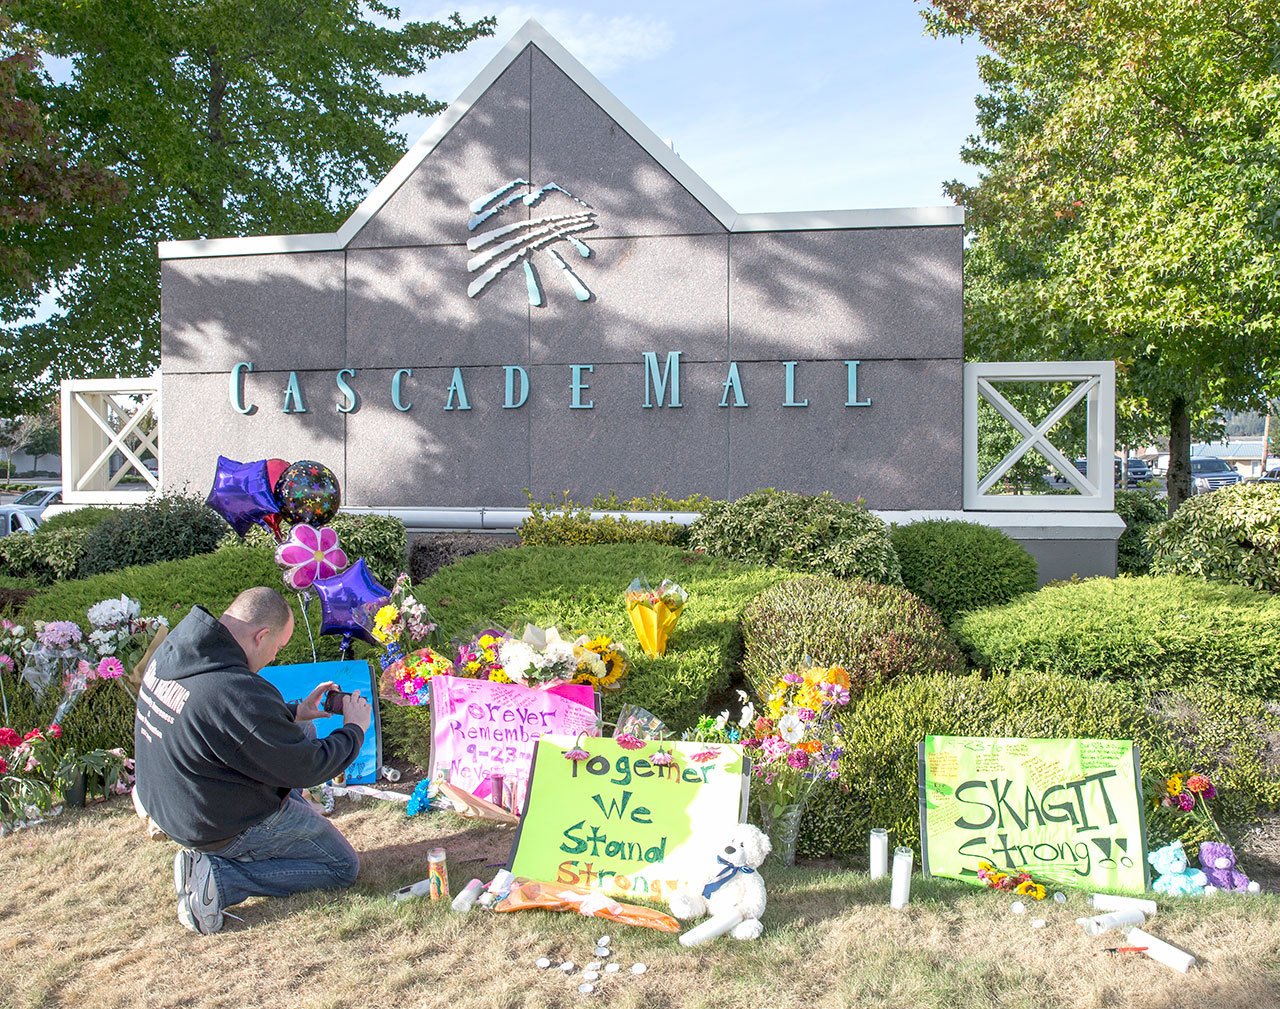 Chris Nelson of Burlington takes a picture of a memorial in Burlington to five victims killed in a shooting on Friday at Cascade Mall. (The Associated Press)